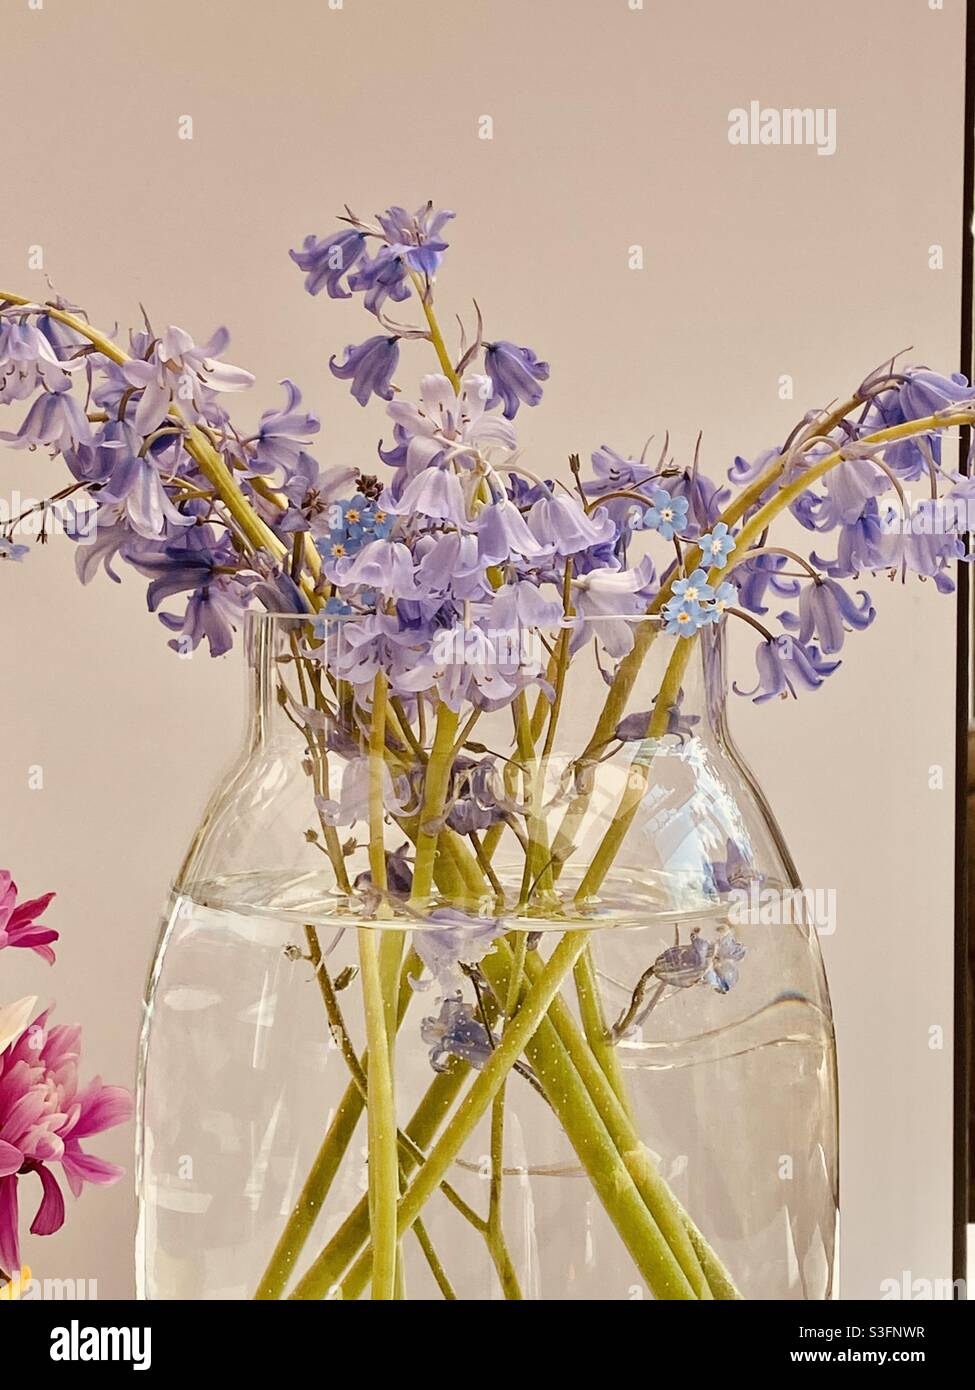 Bluebells in a glass vase Stock Photo